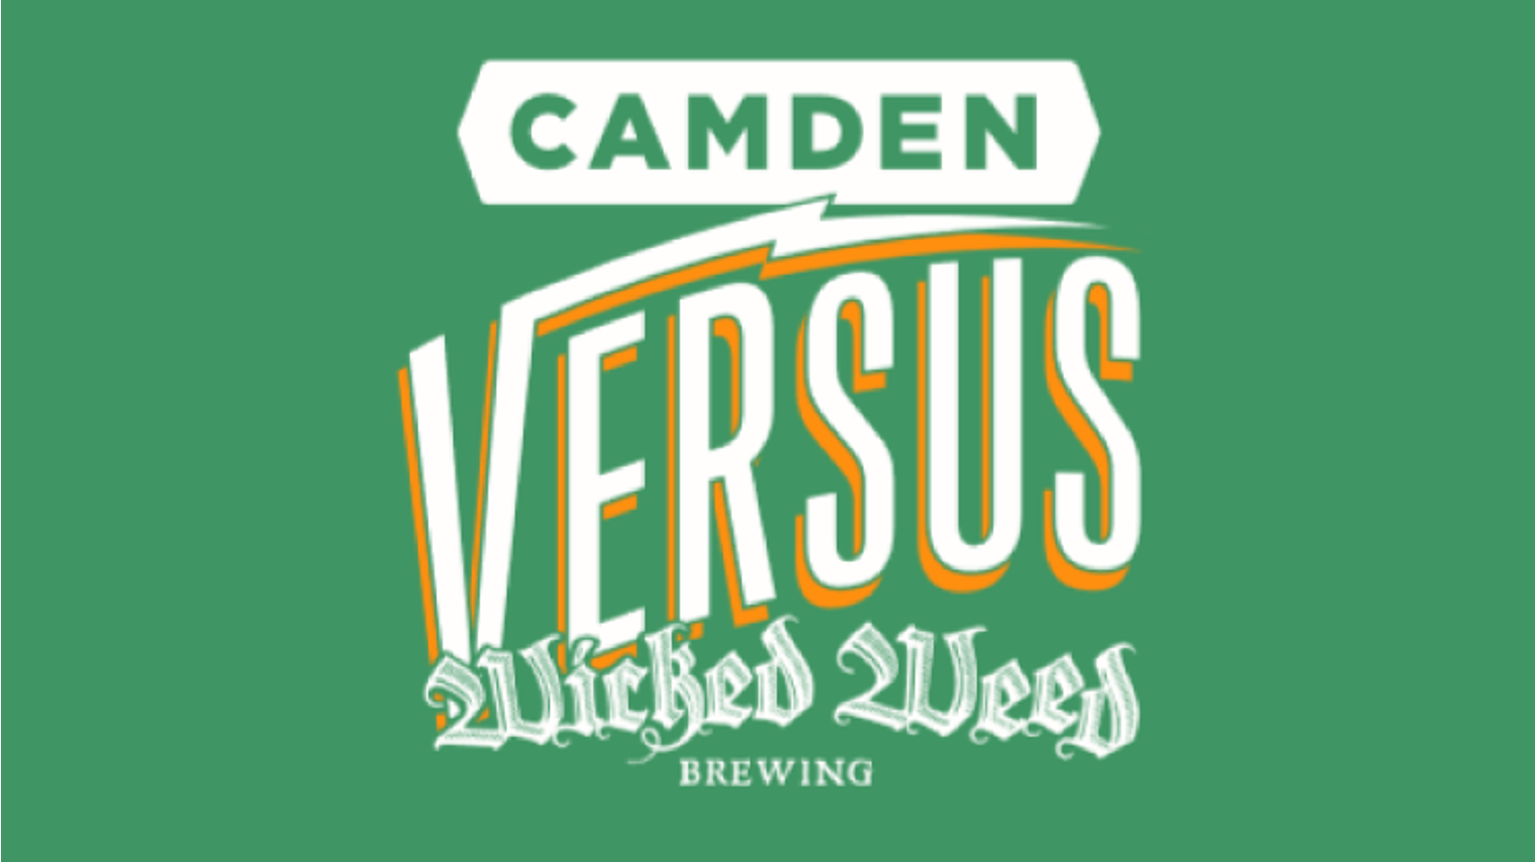 thumbnail for blog article named: Versus - Camden/Wicked Weed